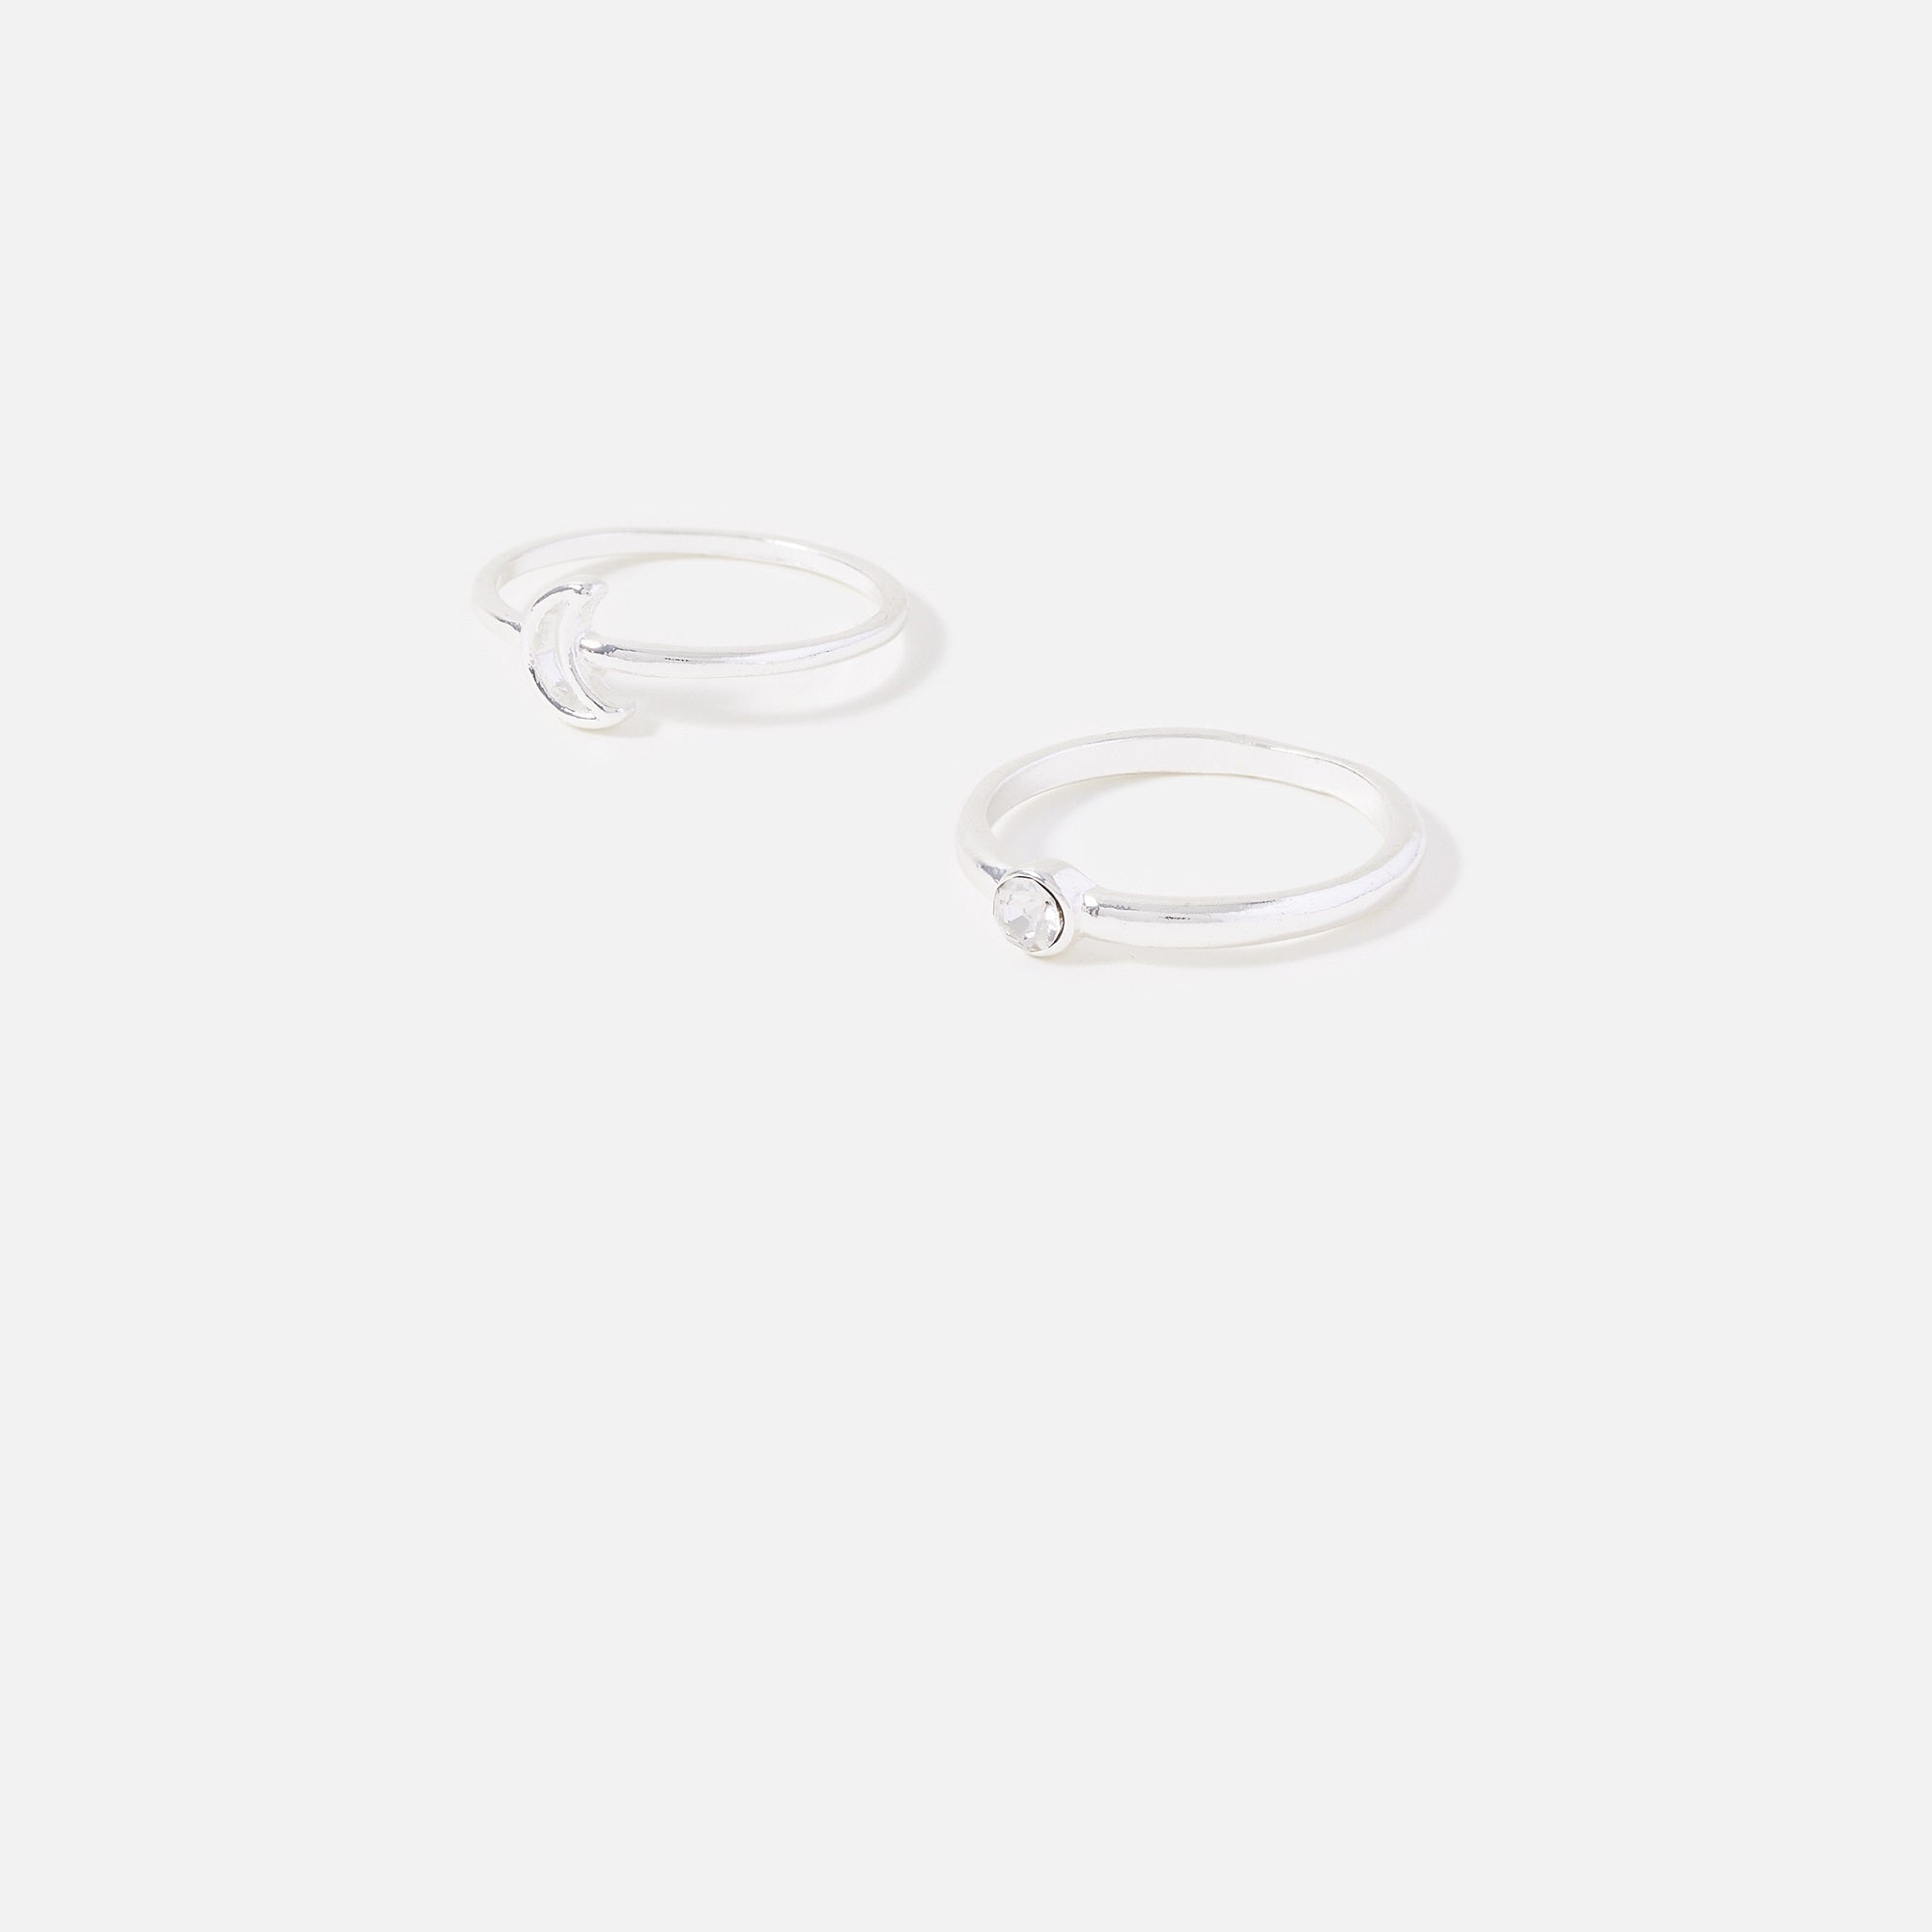 Accessorize London Women's Silver Pack of 2 Moon Crystal Stacking Rings-Medium